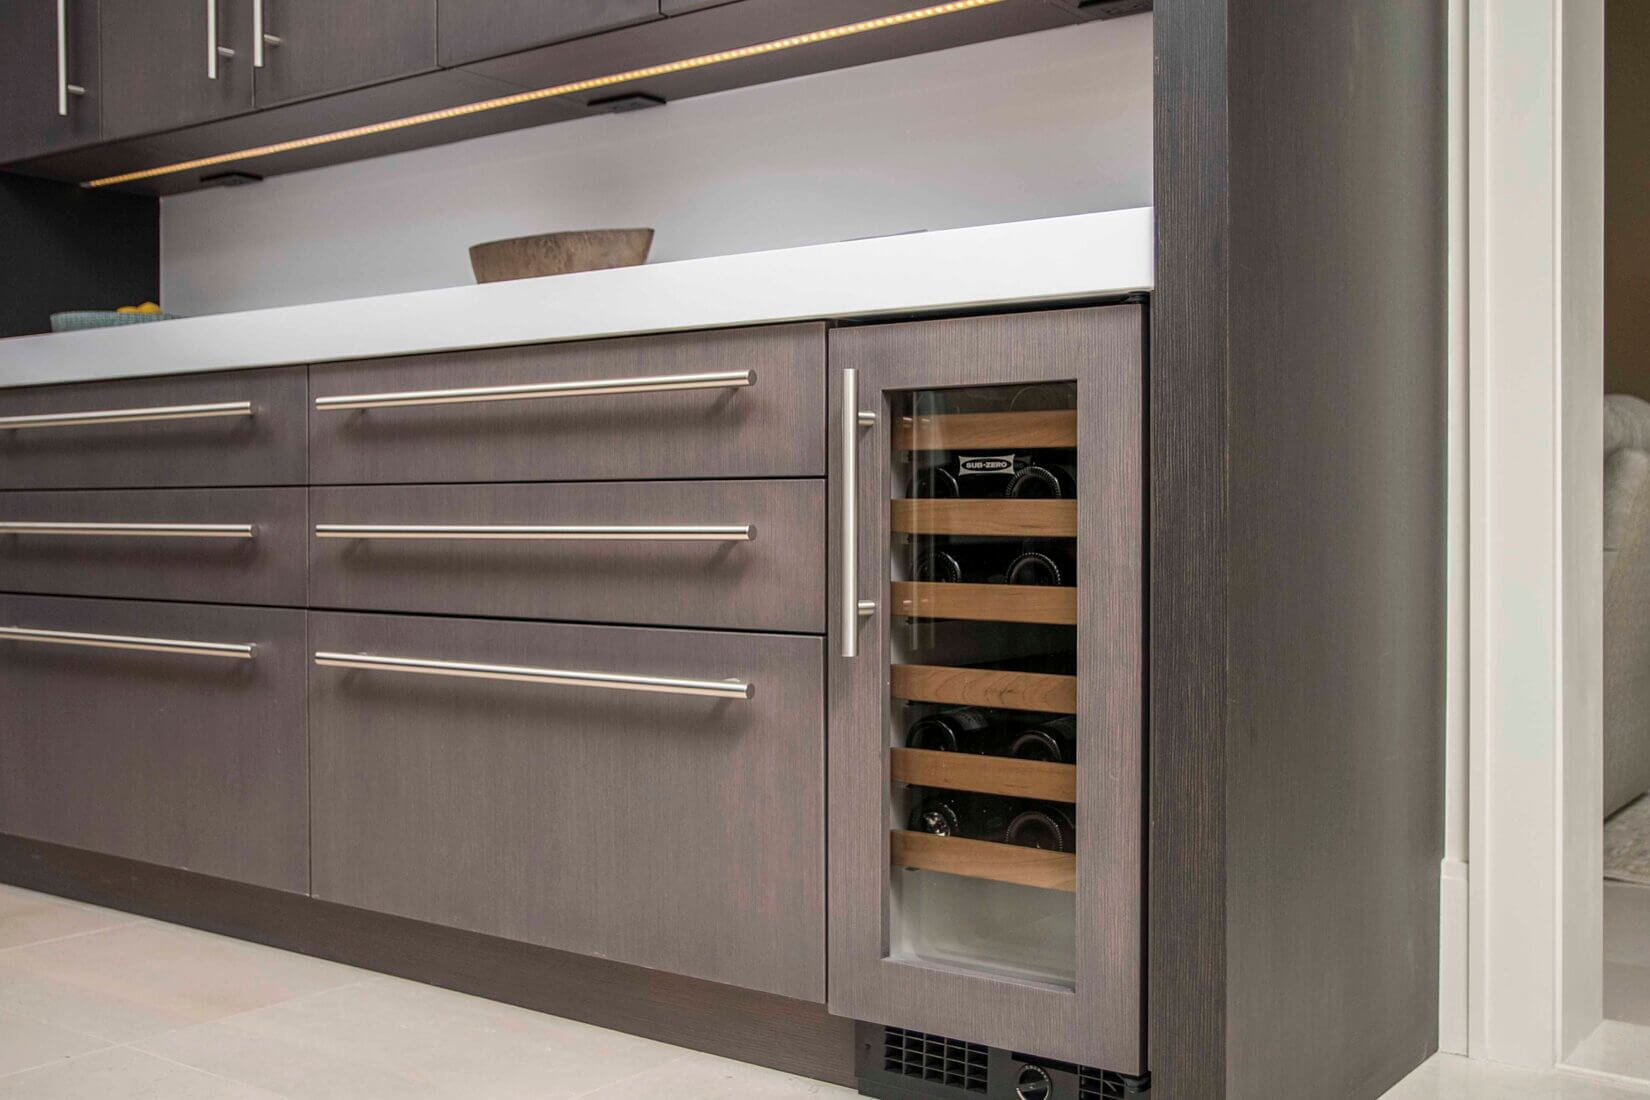 Small wine cooler built into luxury gray-wood cabinetry